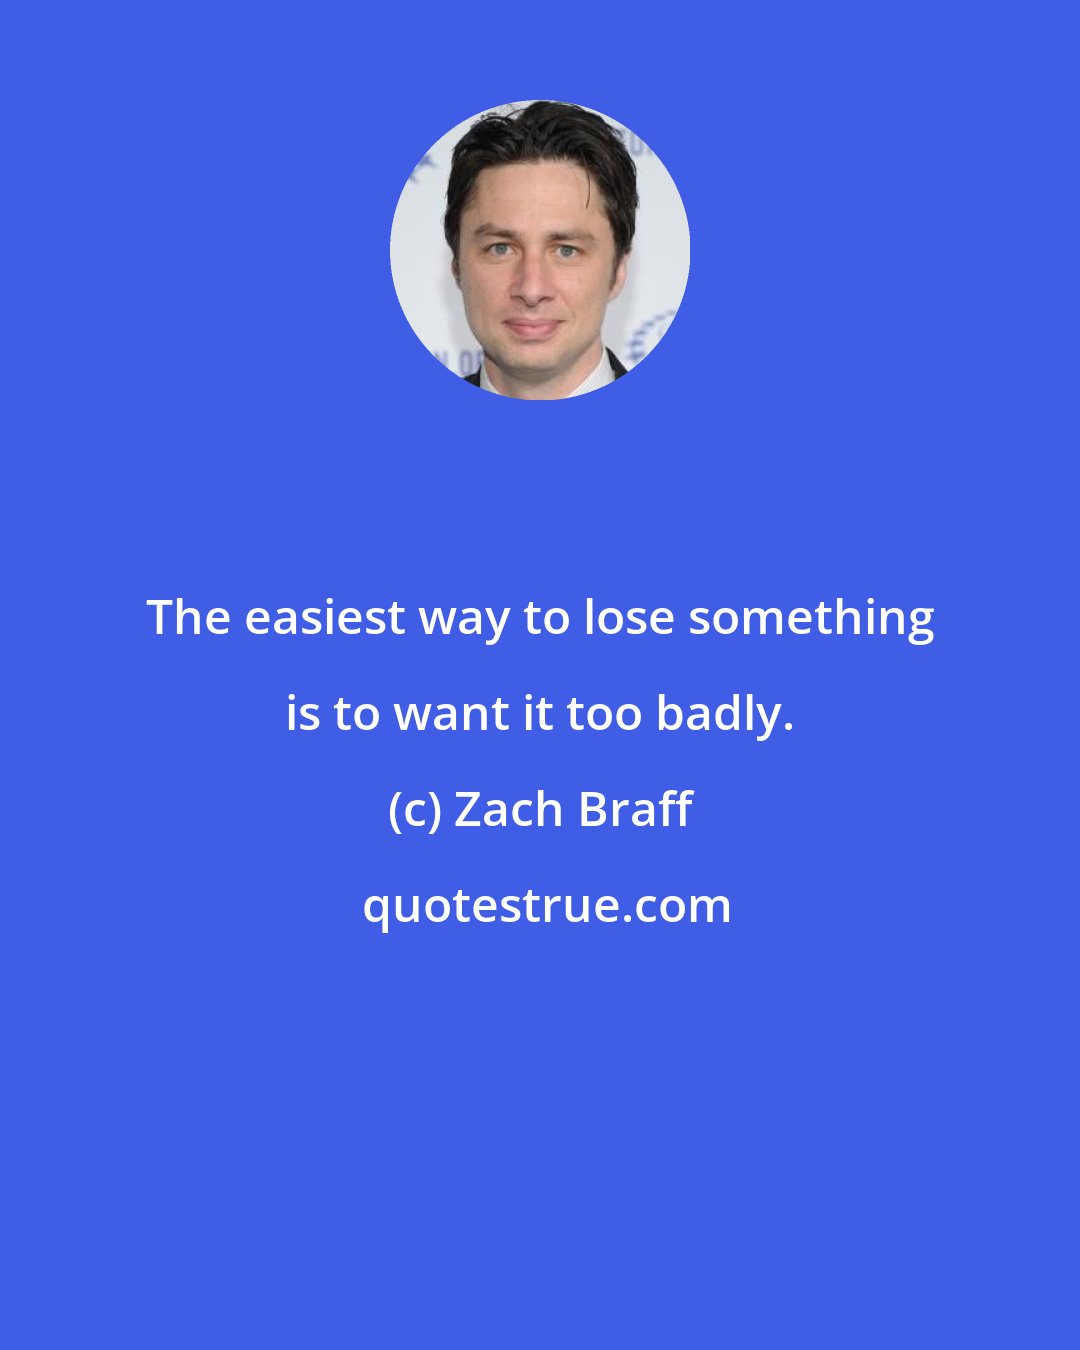 Zach Braff: The easiest way to lose something is to want it too badly.